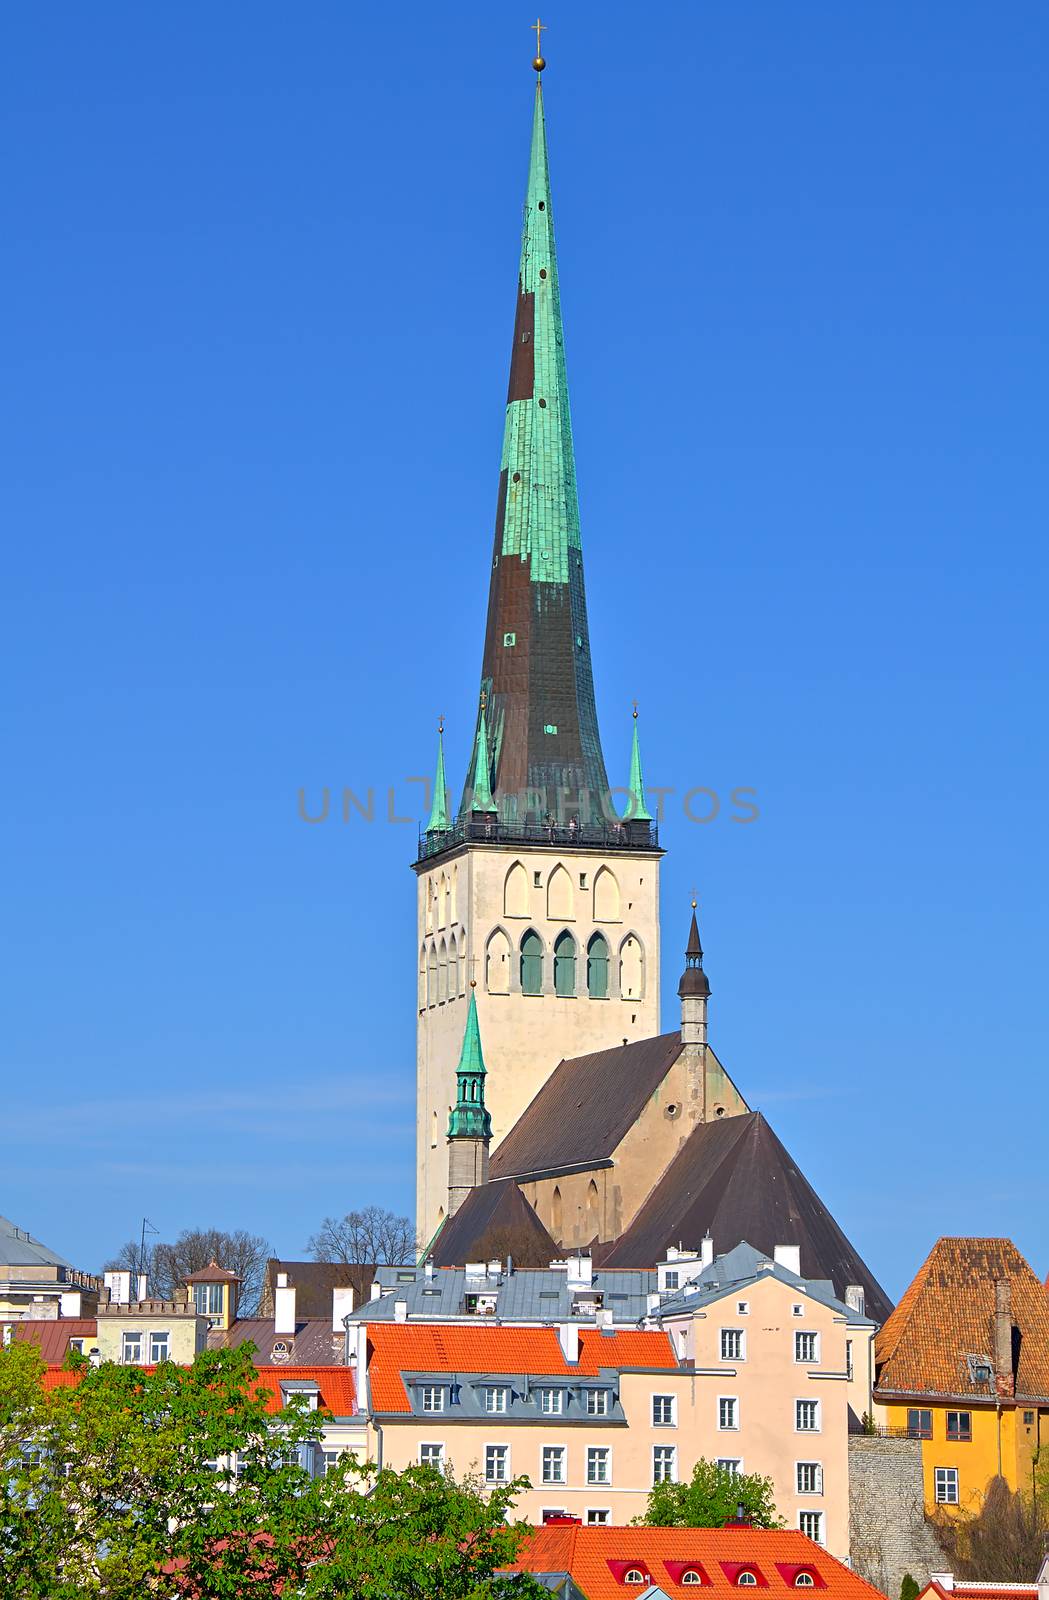 St. Olaf's church in Tallinn, Estonia. Sharp tower of the church with calm blue summer sky on the background. Some colorful buildings in the foreground.